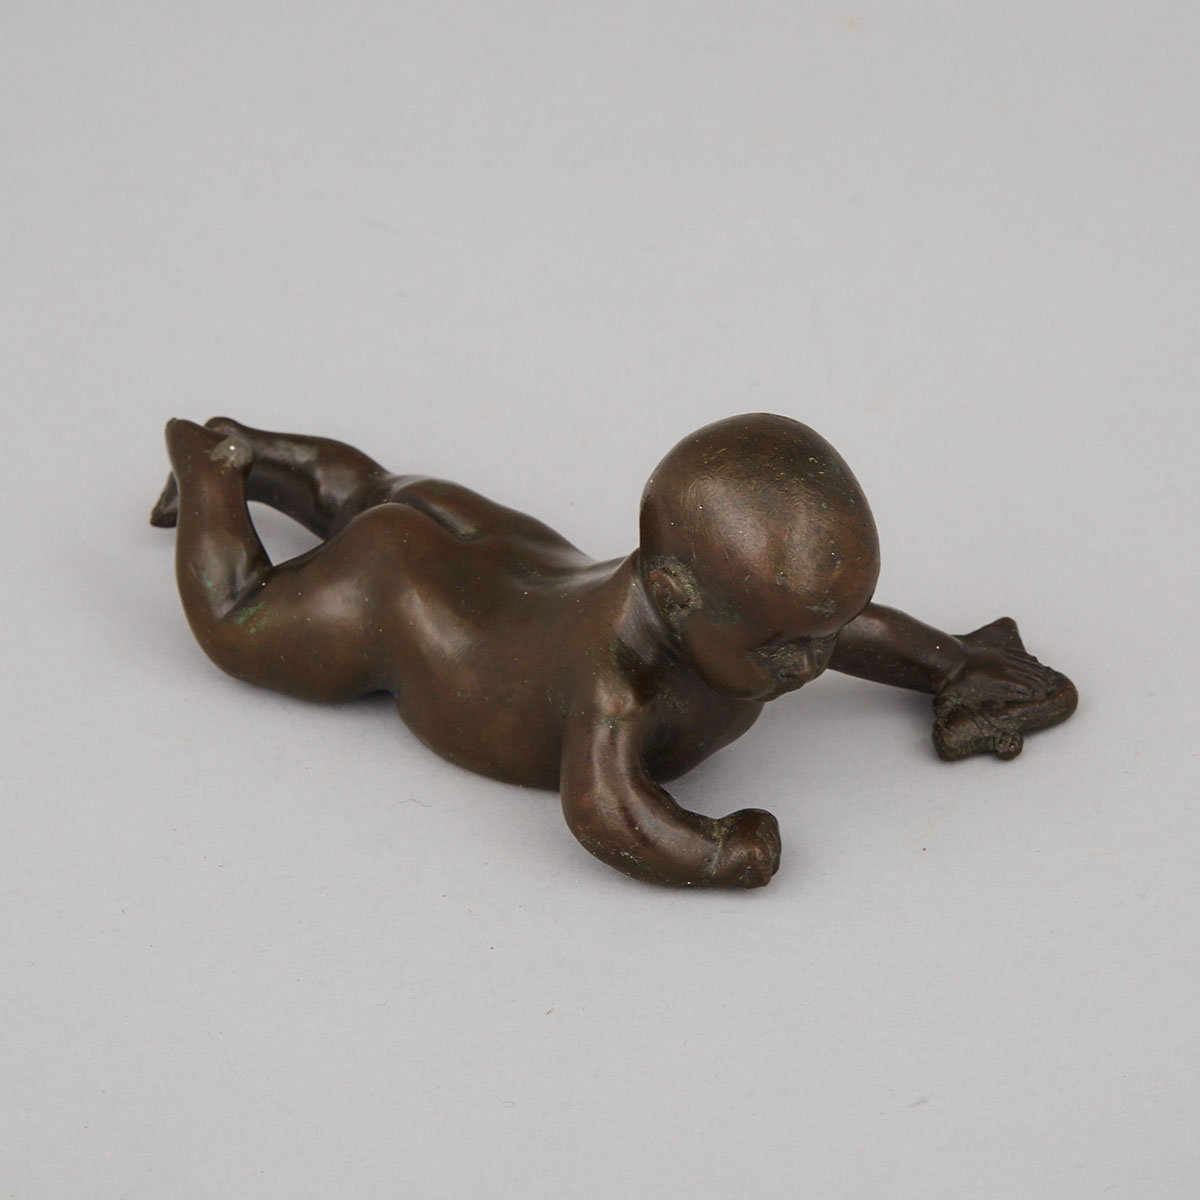 Italian Patinated Bronze Model of a Crawling Baby, Giorgio Sommer Foundry, Naples, early 20th century